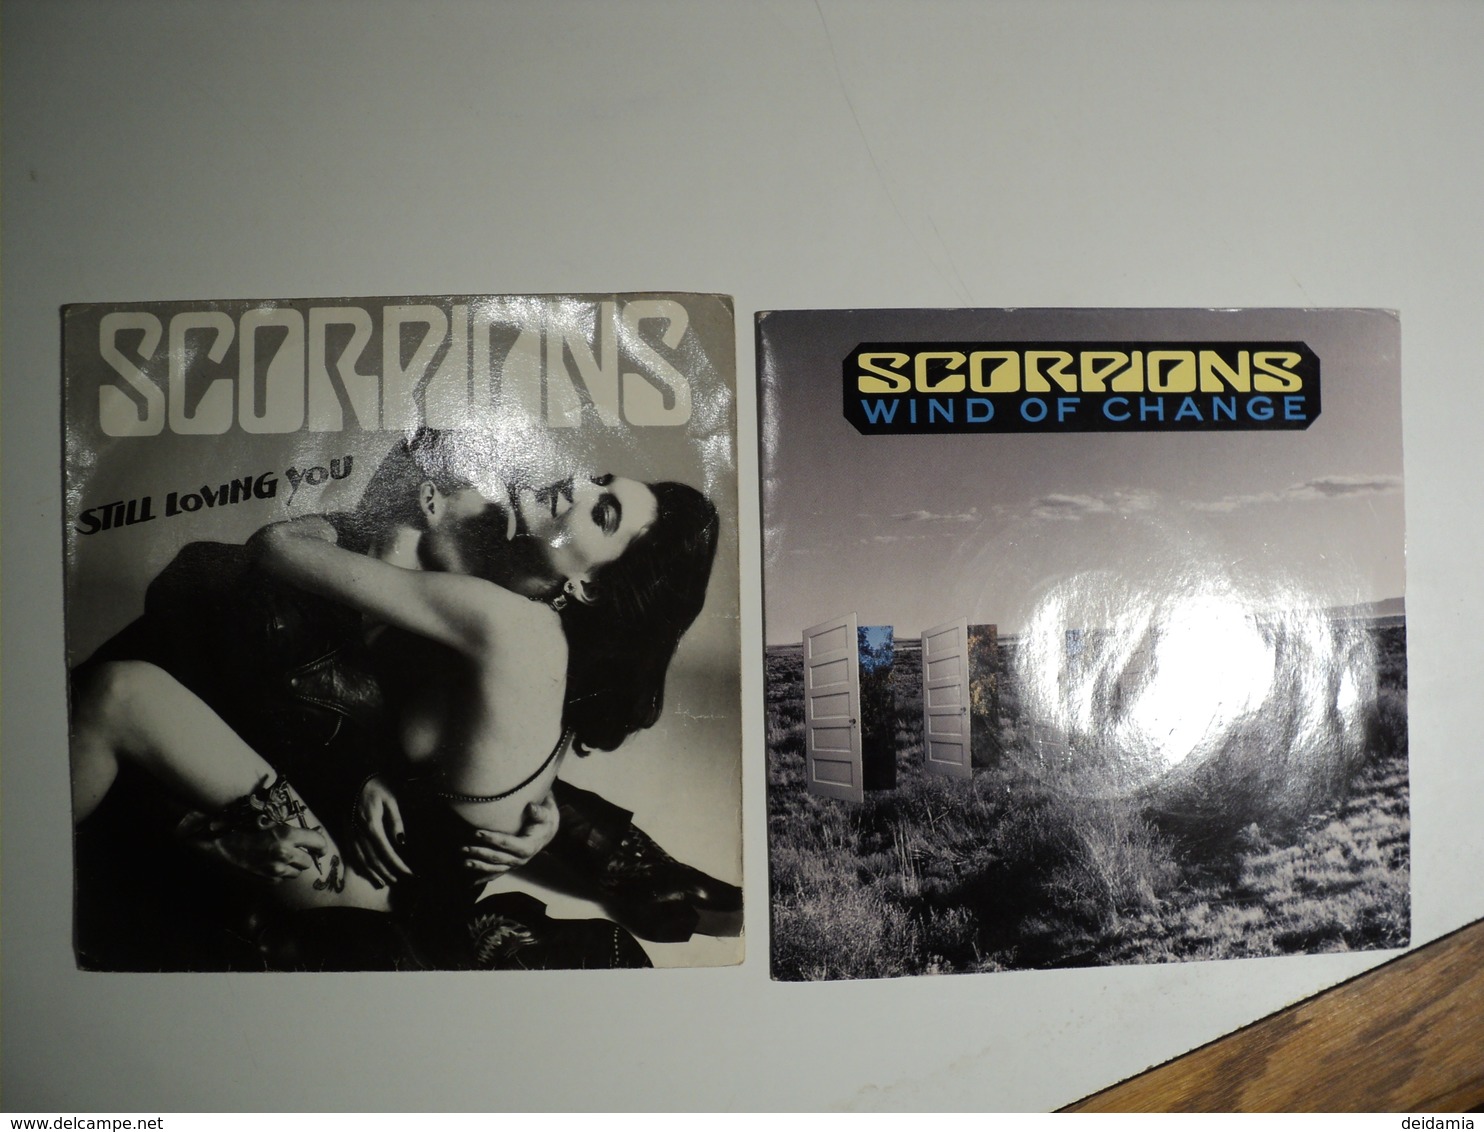 SCORPIONS. LOT DE DEUX 45 TOURS. 1984 / 1990 STILL LOVING YOU / AS SON AS THE GOOD TIMES ROLL / WIND OF CHANGE / TEASE - Rock